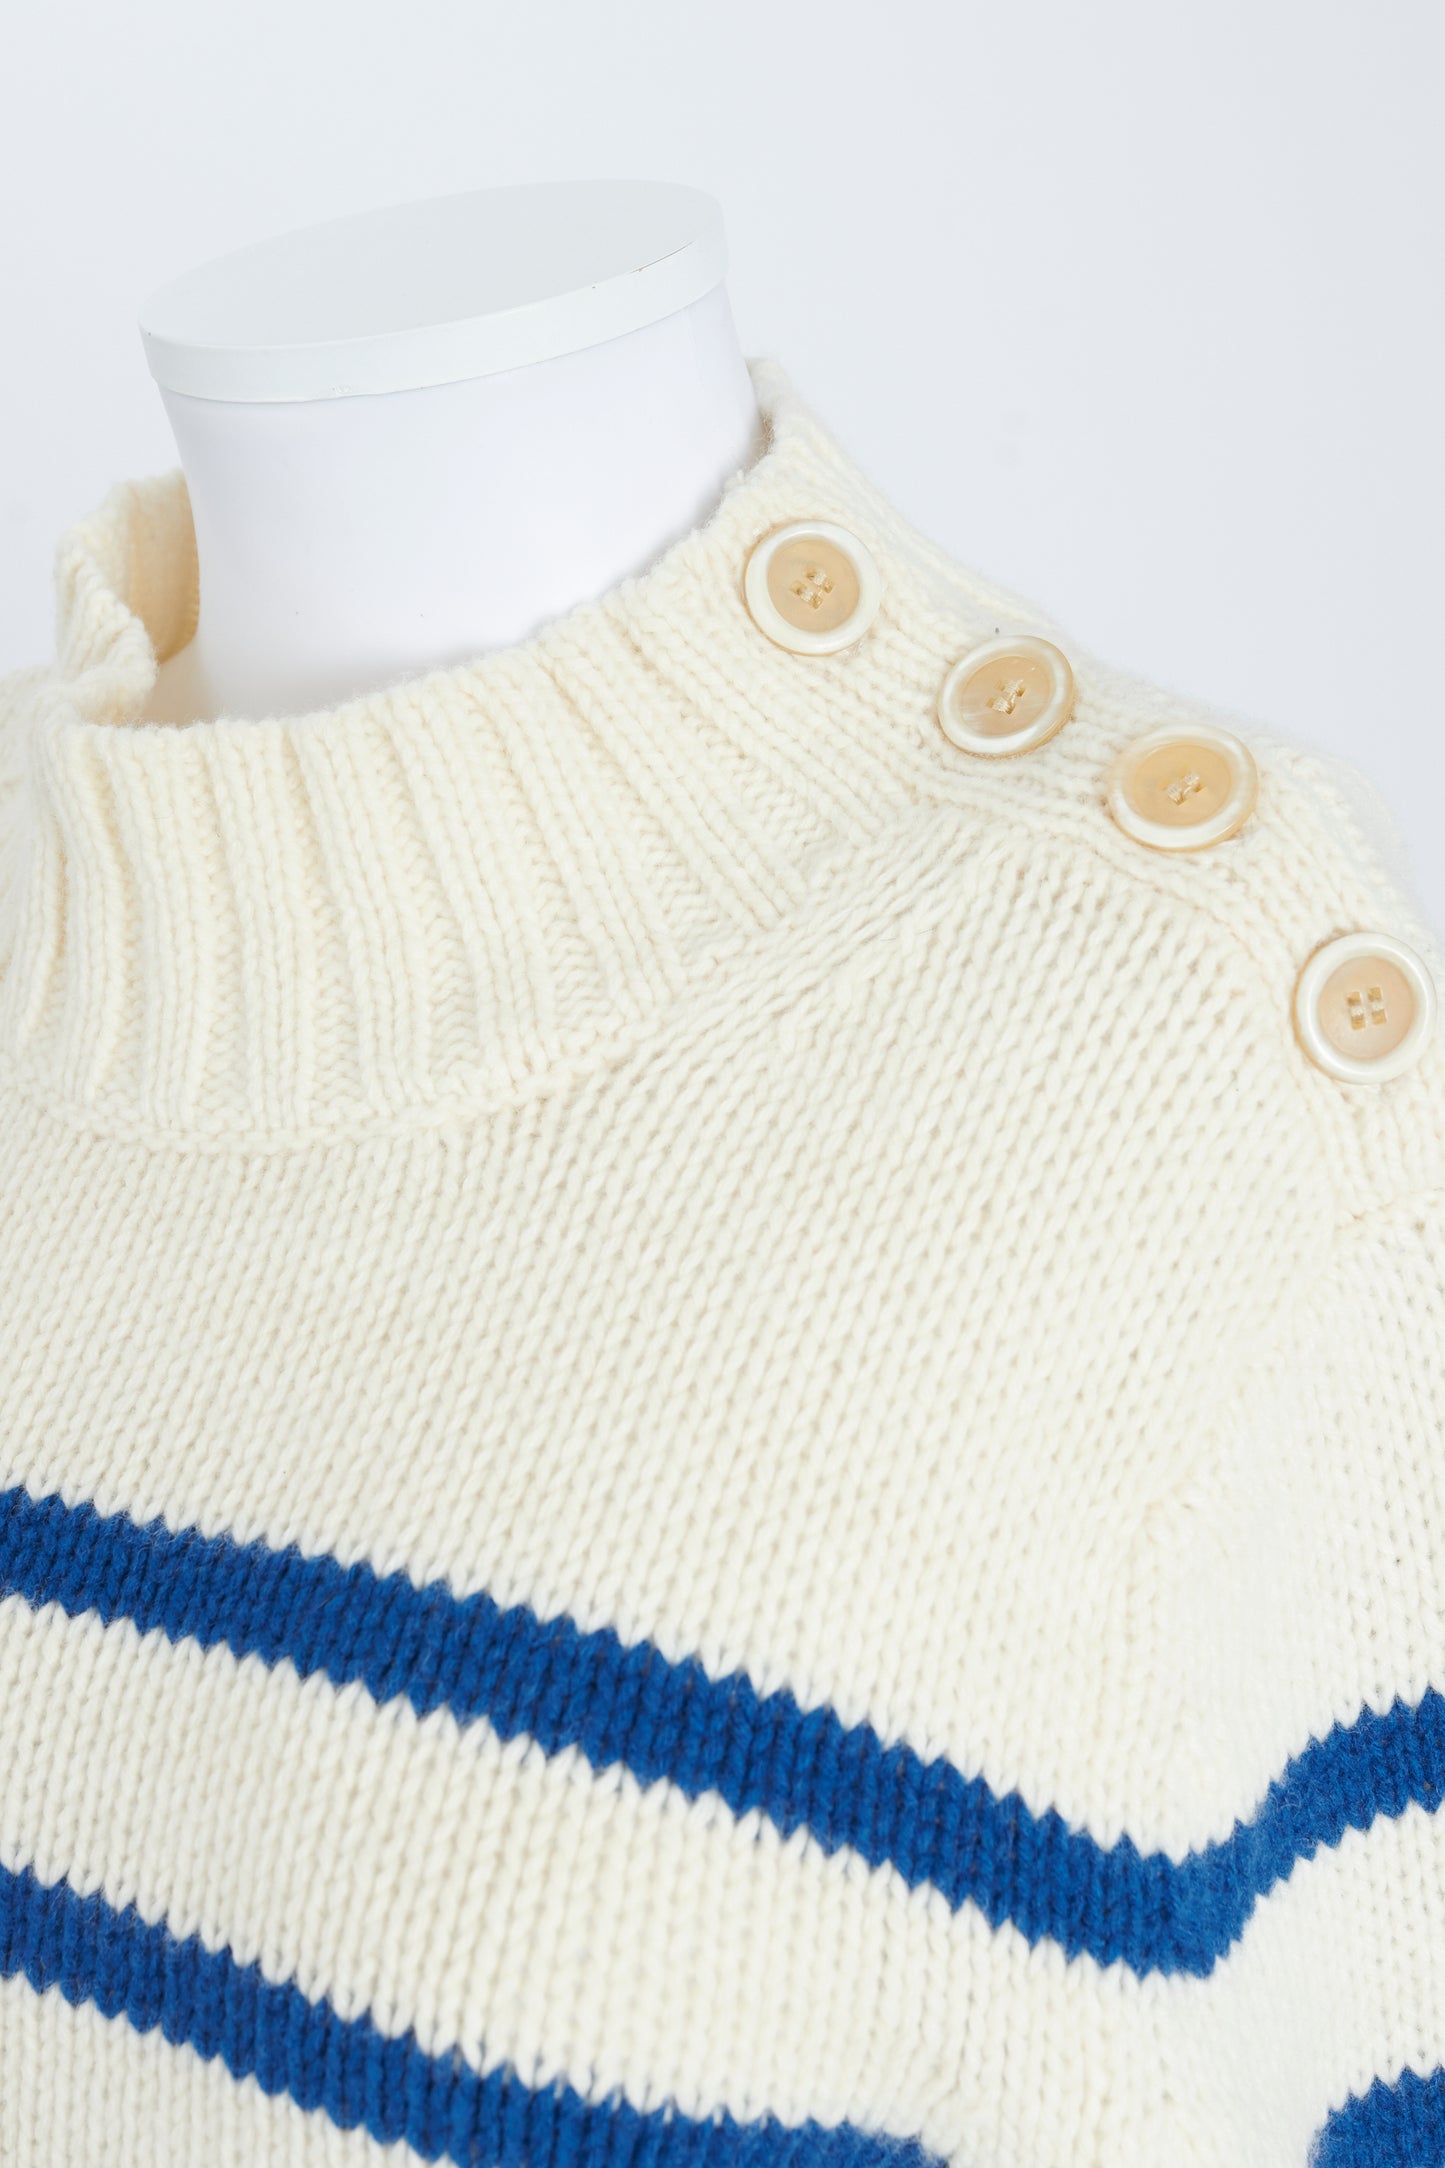 White and Blue Striped Knitted Sweater